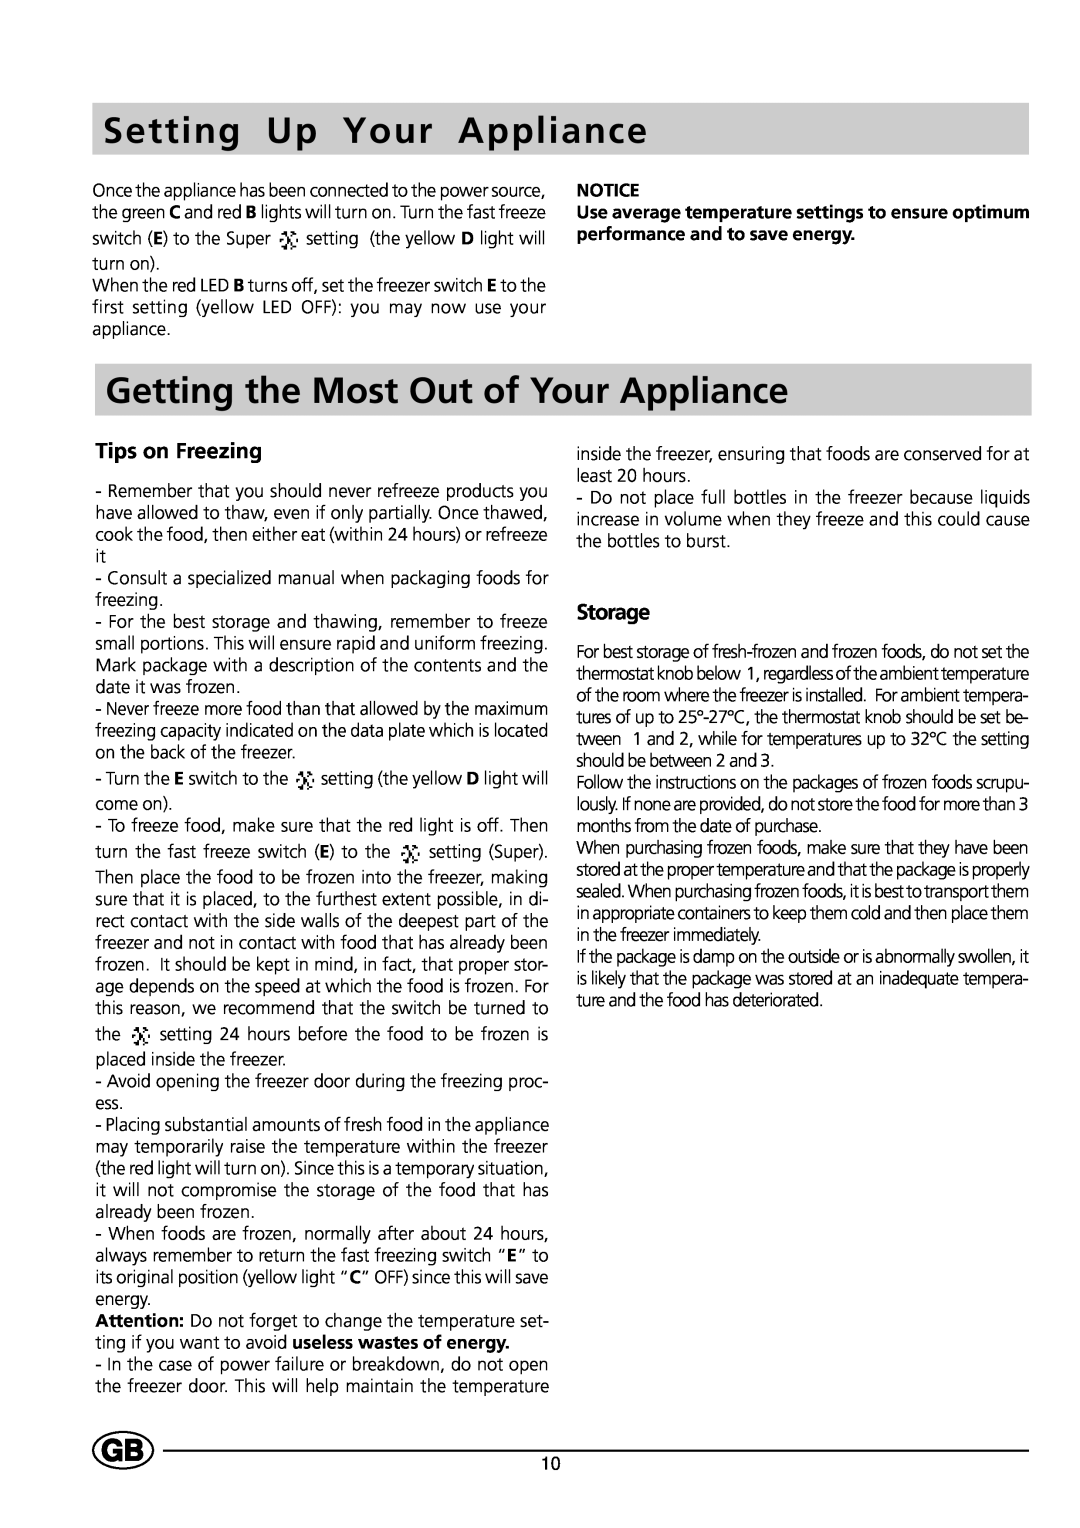 Indesit GCO120 manual Setting Up Your Appliance, Getting the Most Out of Your Appliance, Tips on Freezing, Storage 